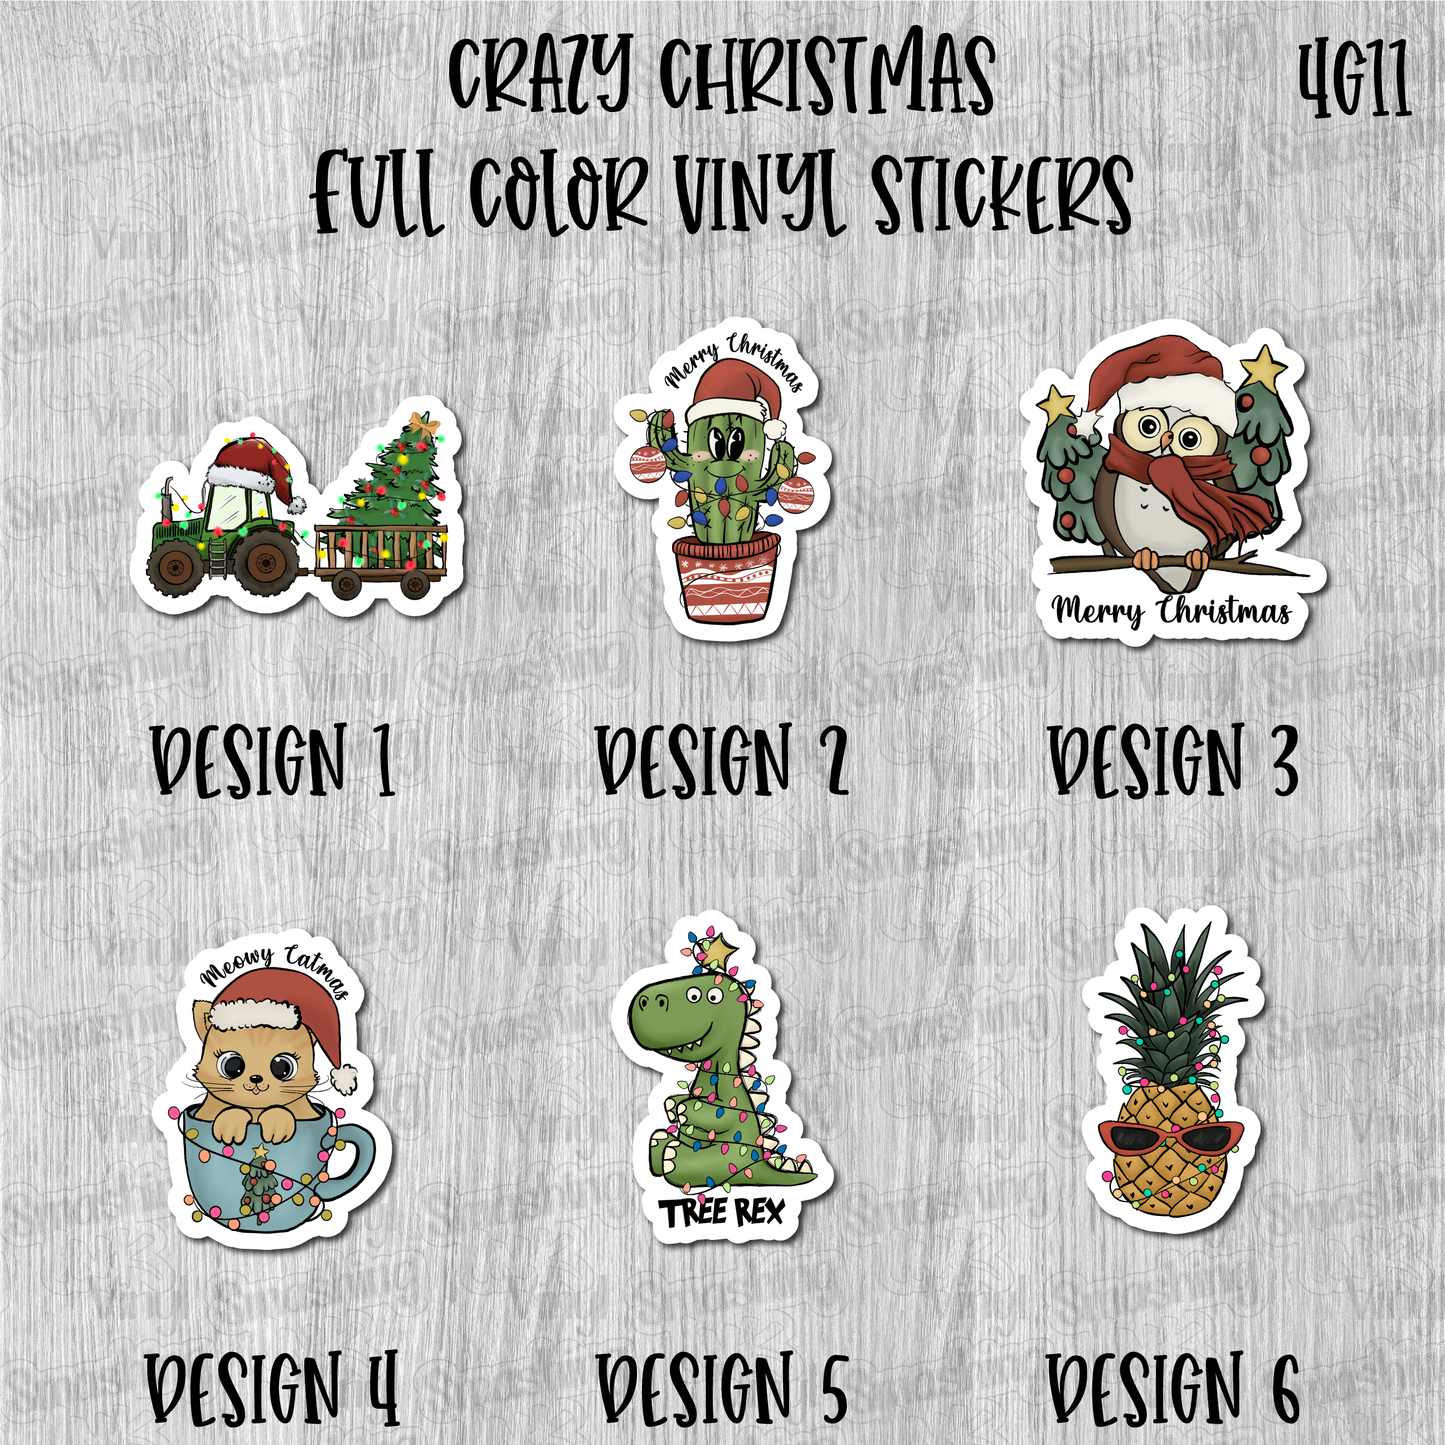 Crazy Christmas - Full Color Vinyl Stickers (SHIPS IN 3-7 BUS DAYS)